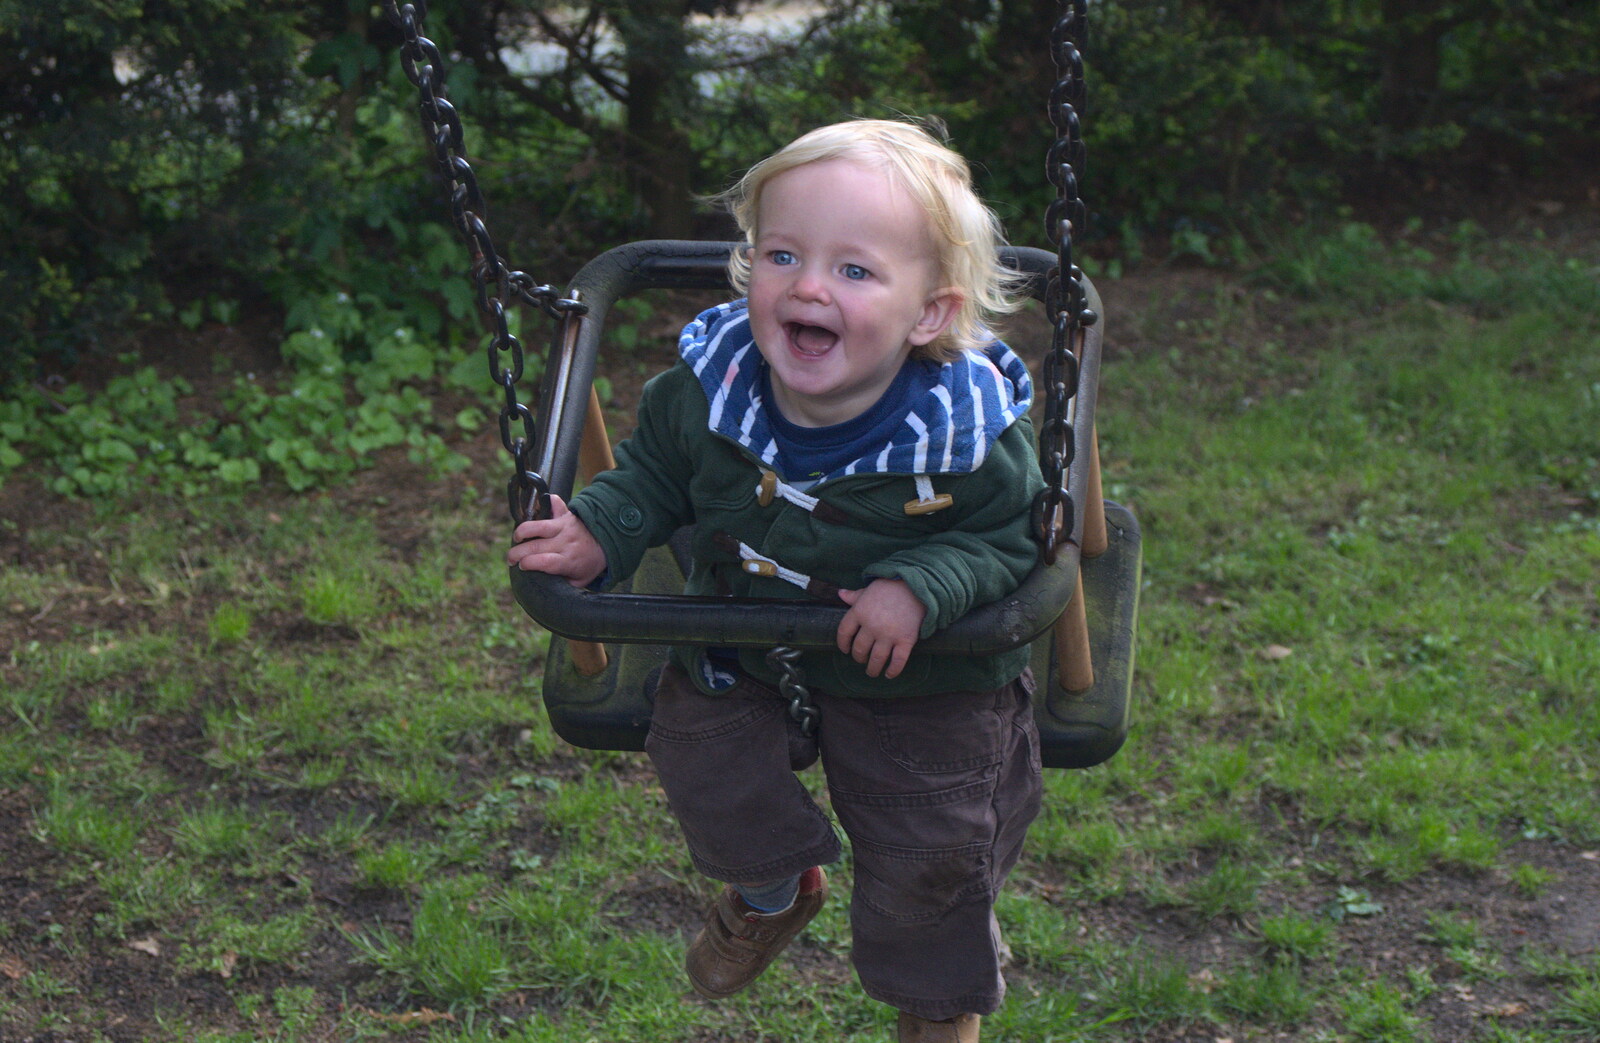 Harry's enjoying the swings from A Trip on the Norfolk Broads, Wroxham, Norfolk - 25th May 2013